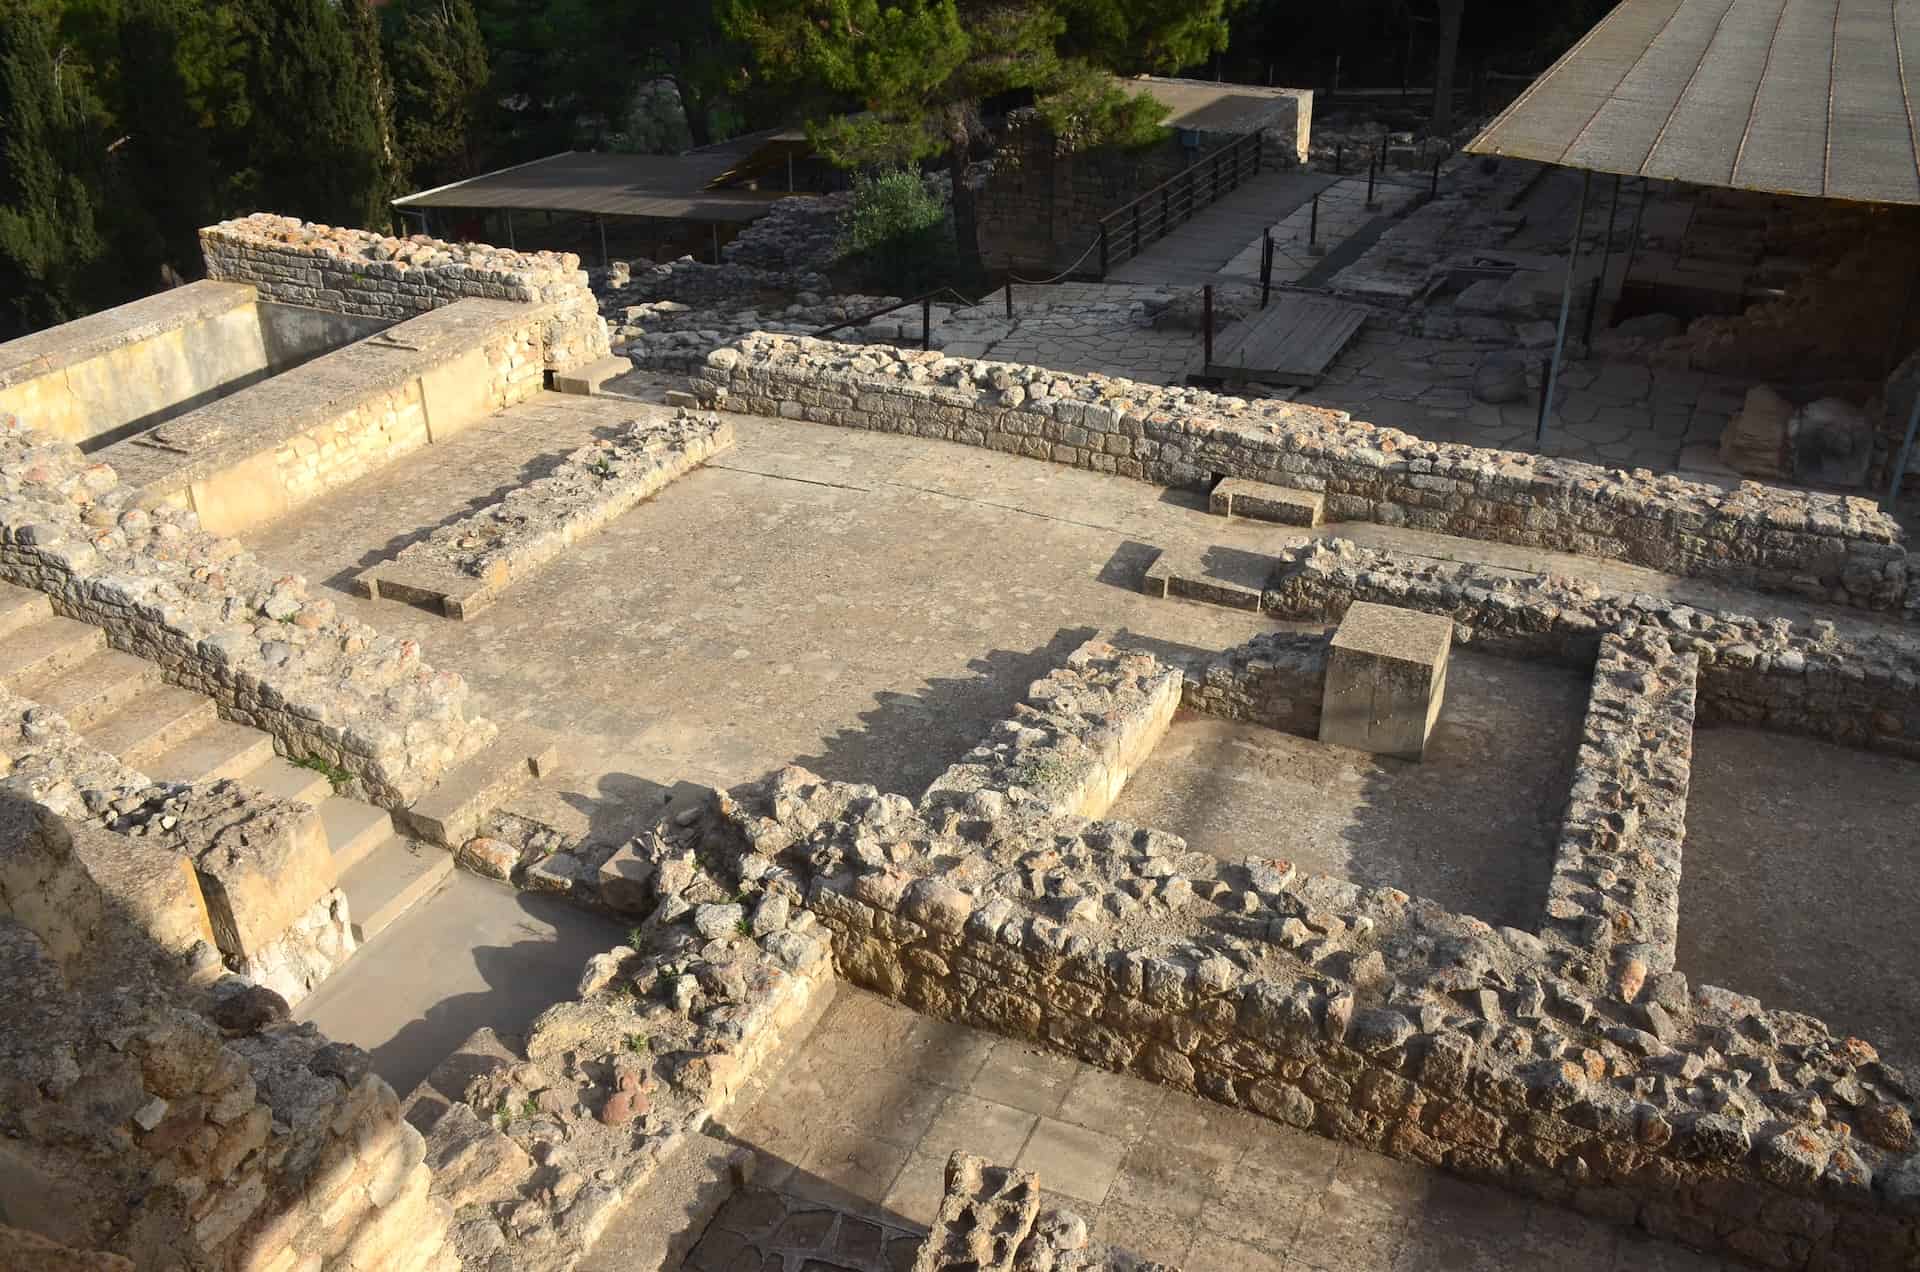 Queen's Hall in the East Wing at Knossos, Crete, Greece